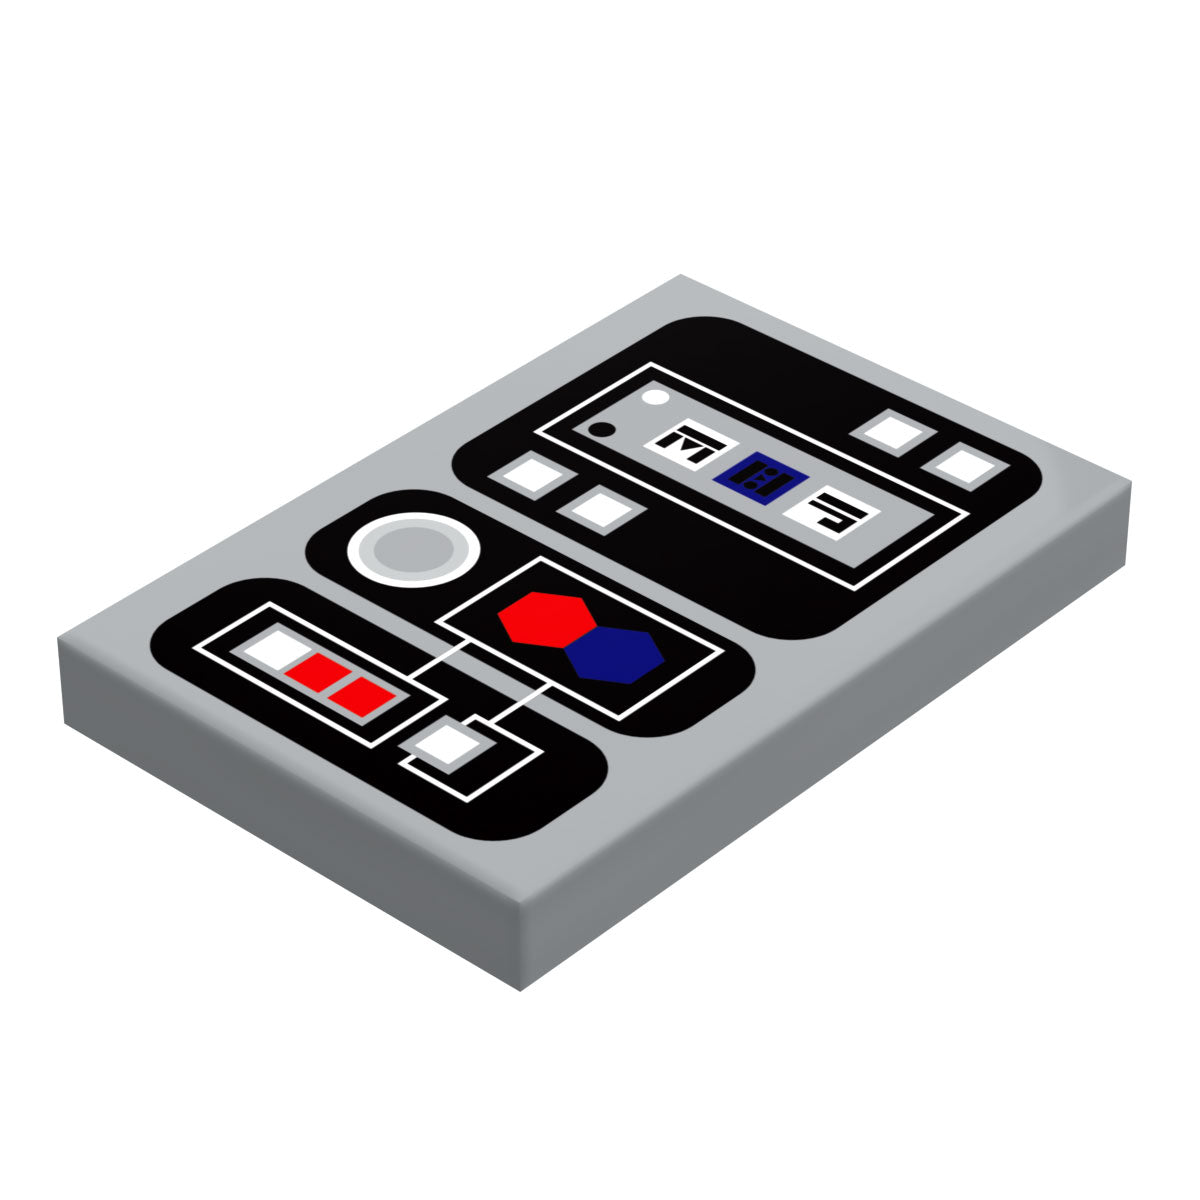 Control Panel #2 for Star Wars/Space (2x3 Tile) - B3 Customs using LEGO parts